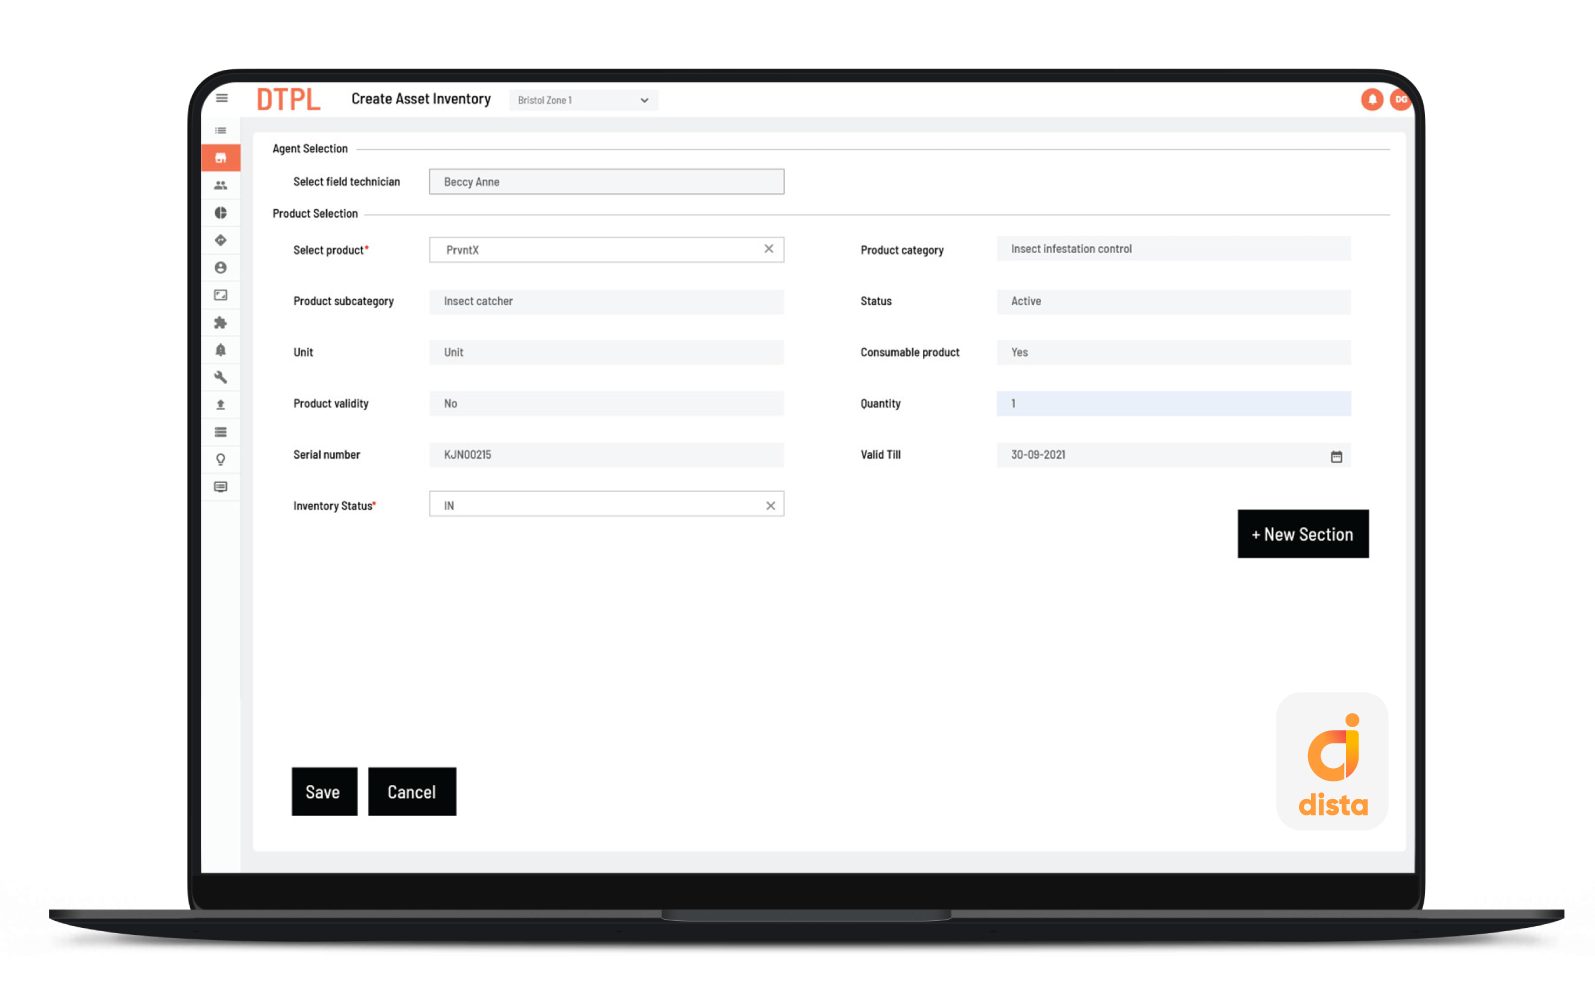 The inventory management feature helps ensure that technicians have exactly what they need before starting each service call, resulting in higher first-time fix rates (FTFR) and more satisfied customers.